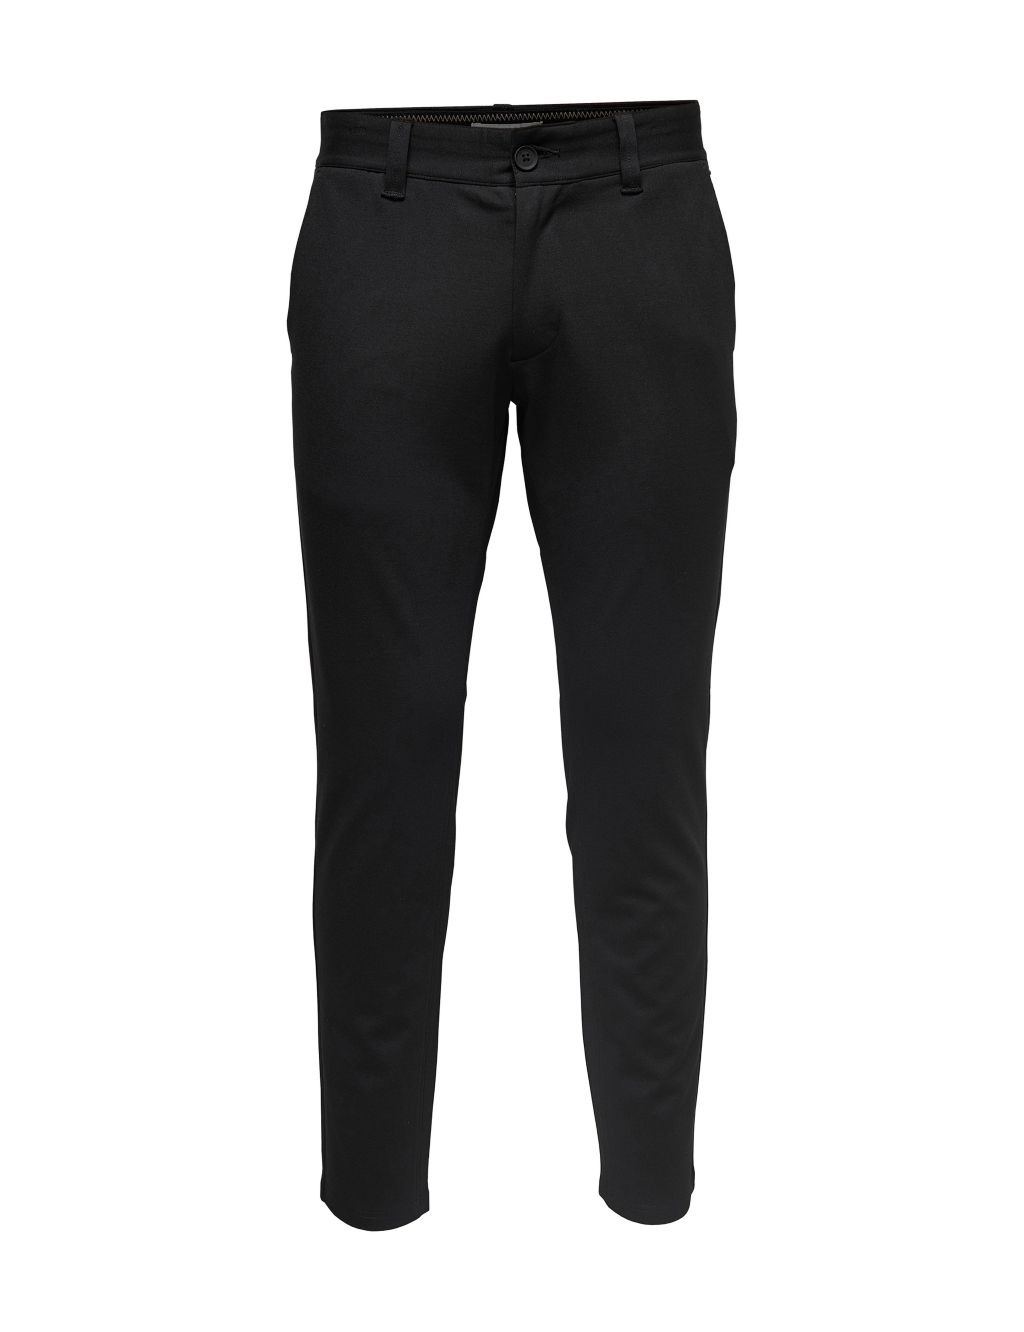 Tapered Fit Flat Front Trousers image 2